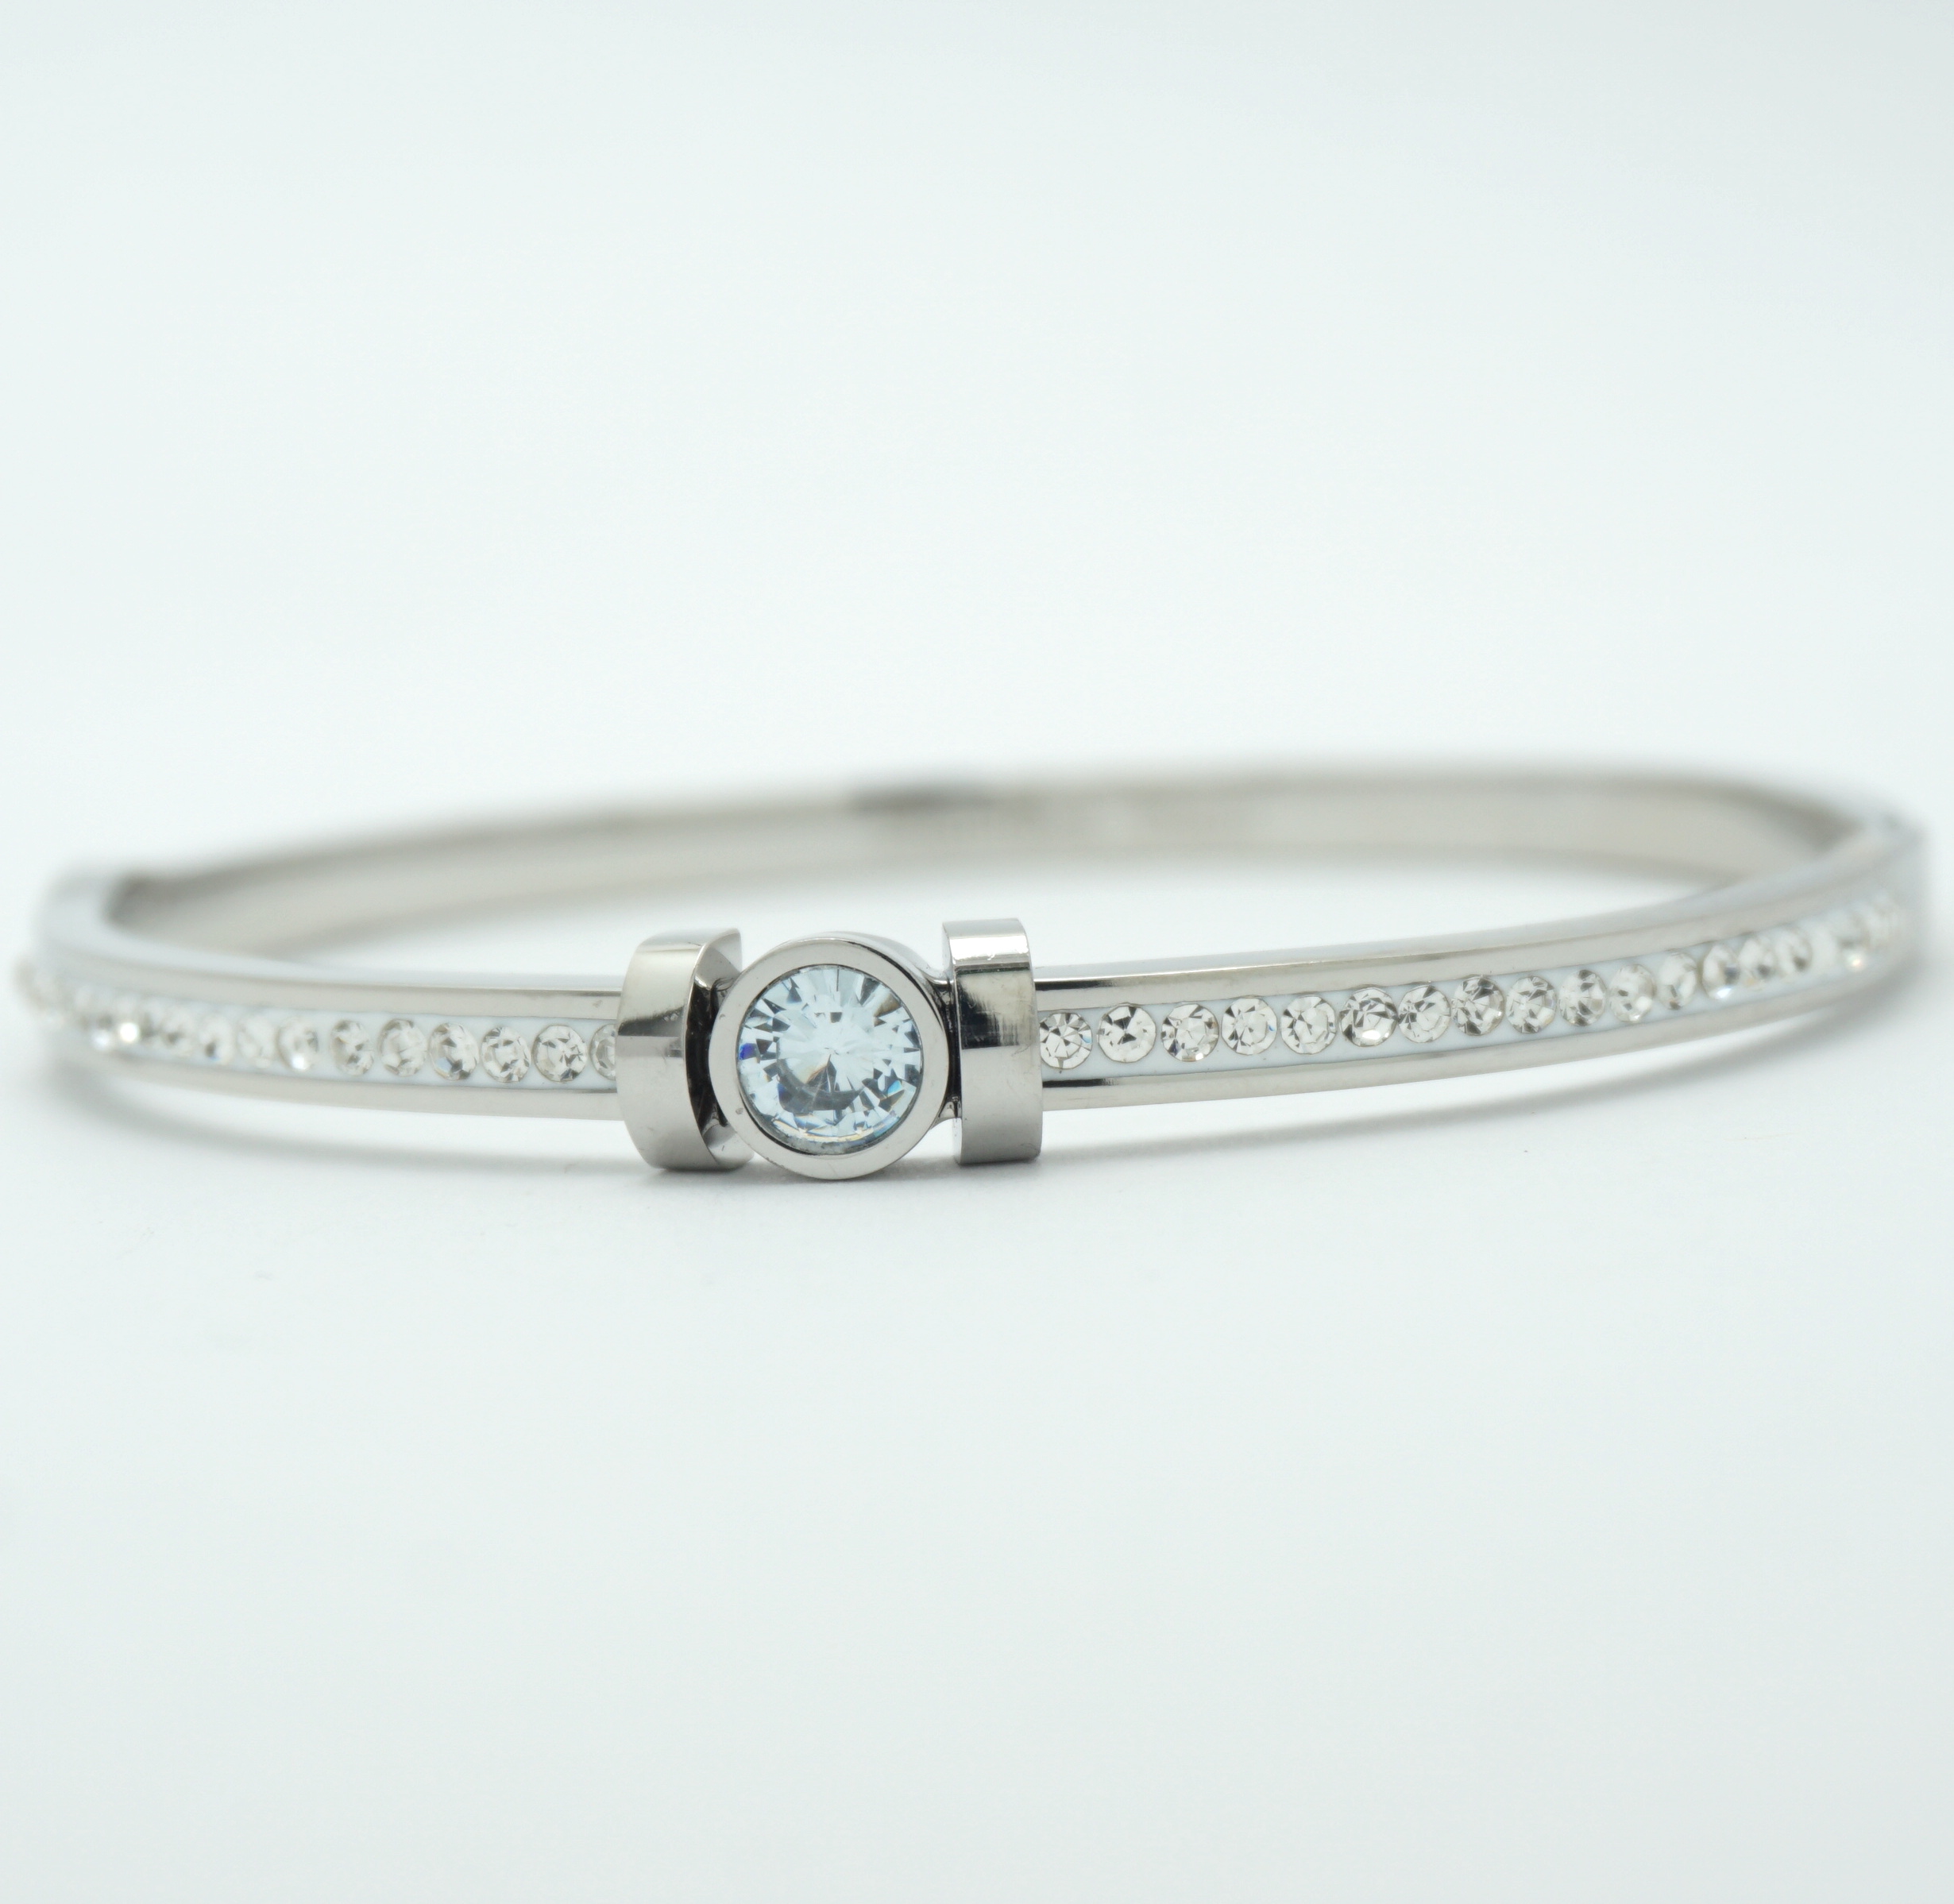 Band Crystal Center Stone Bracelet in Silver